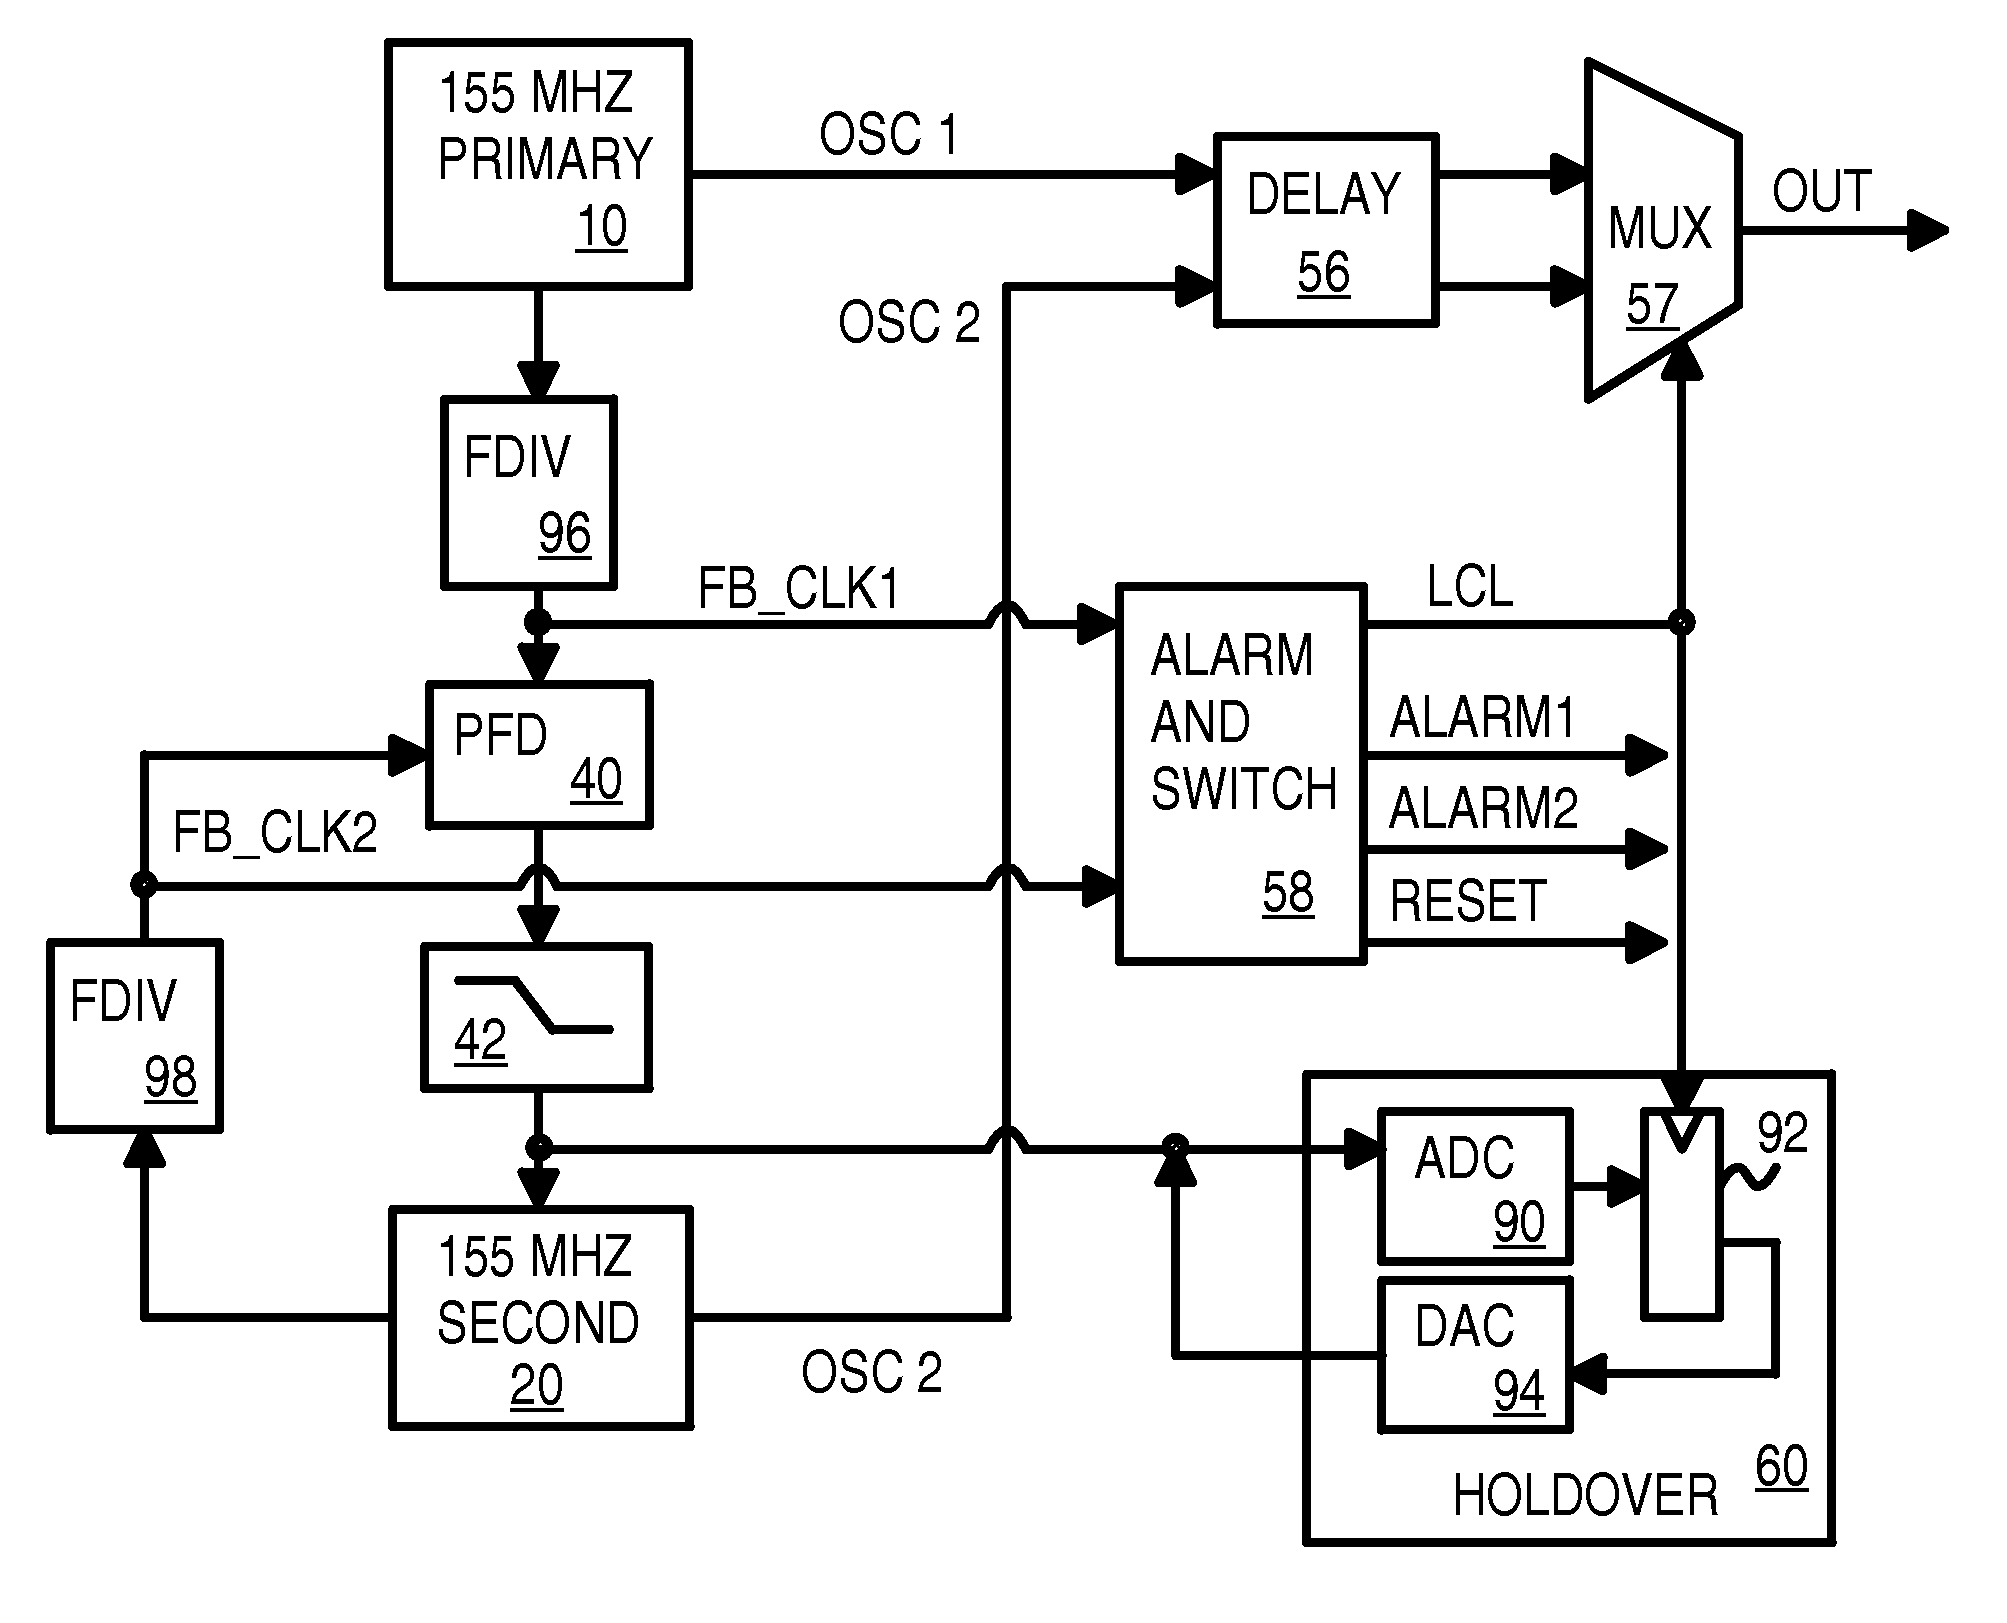 Redundant back-up PLL oscillator phase-locked to primary oscillator with fail-over to back-up oscillator without a third oscillator